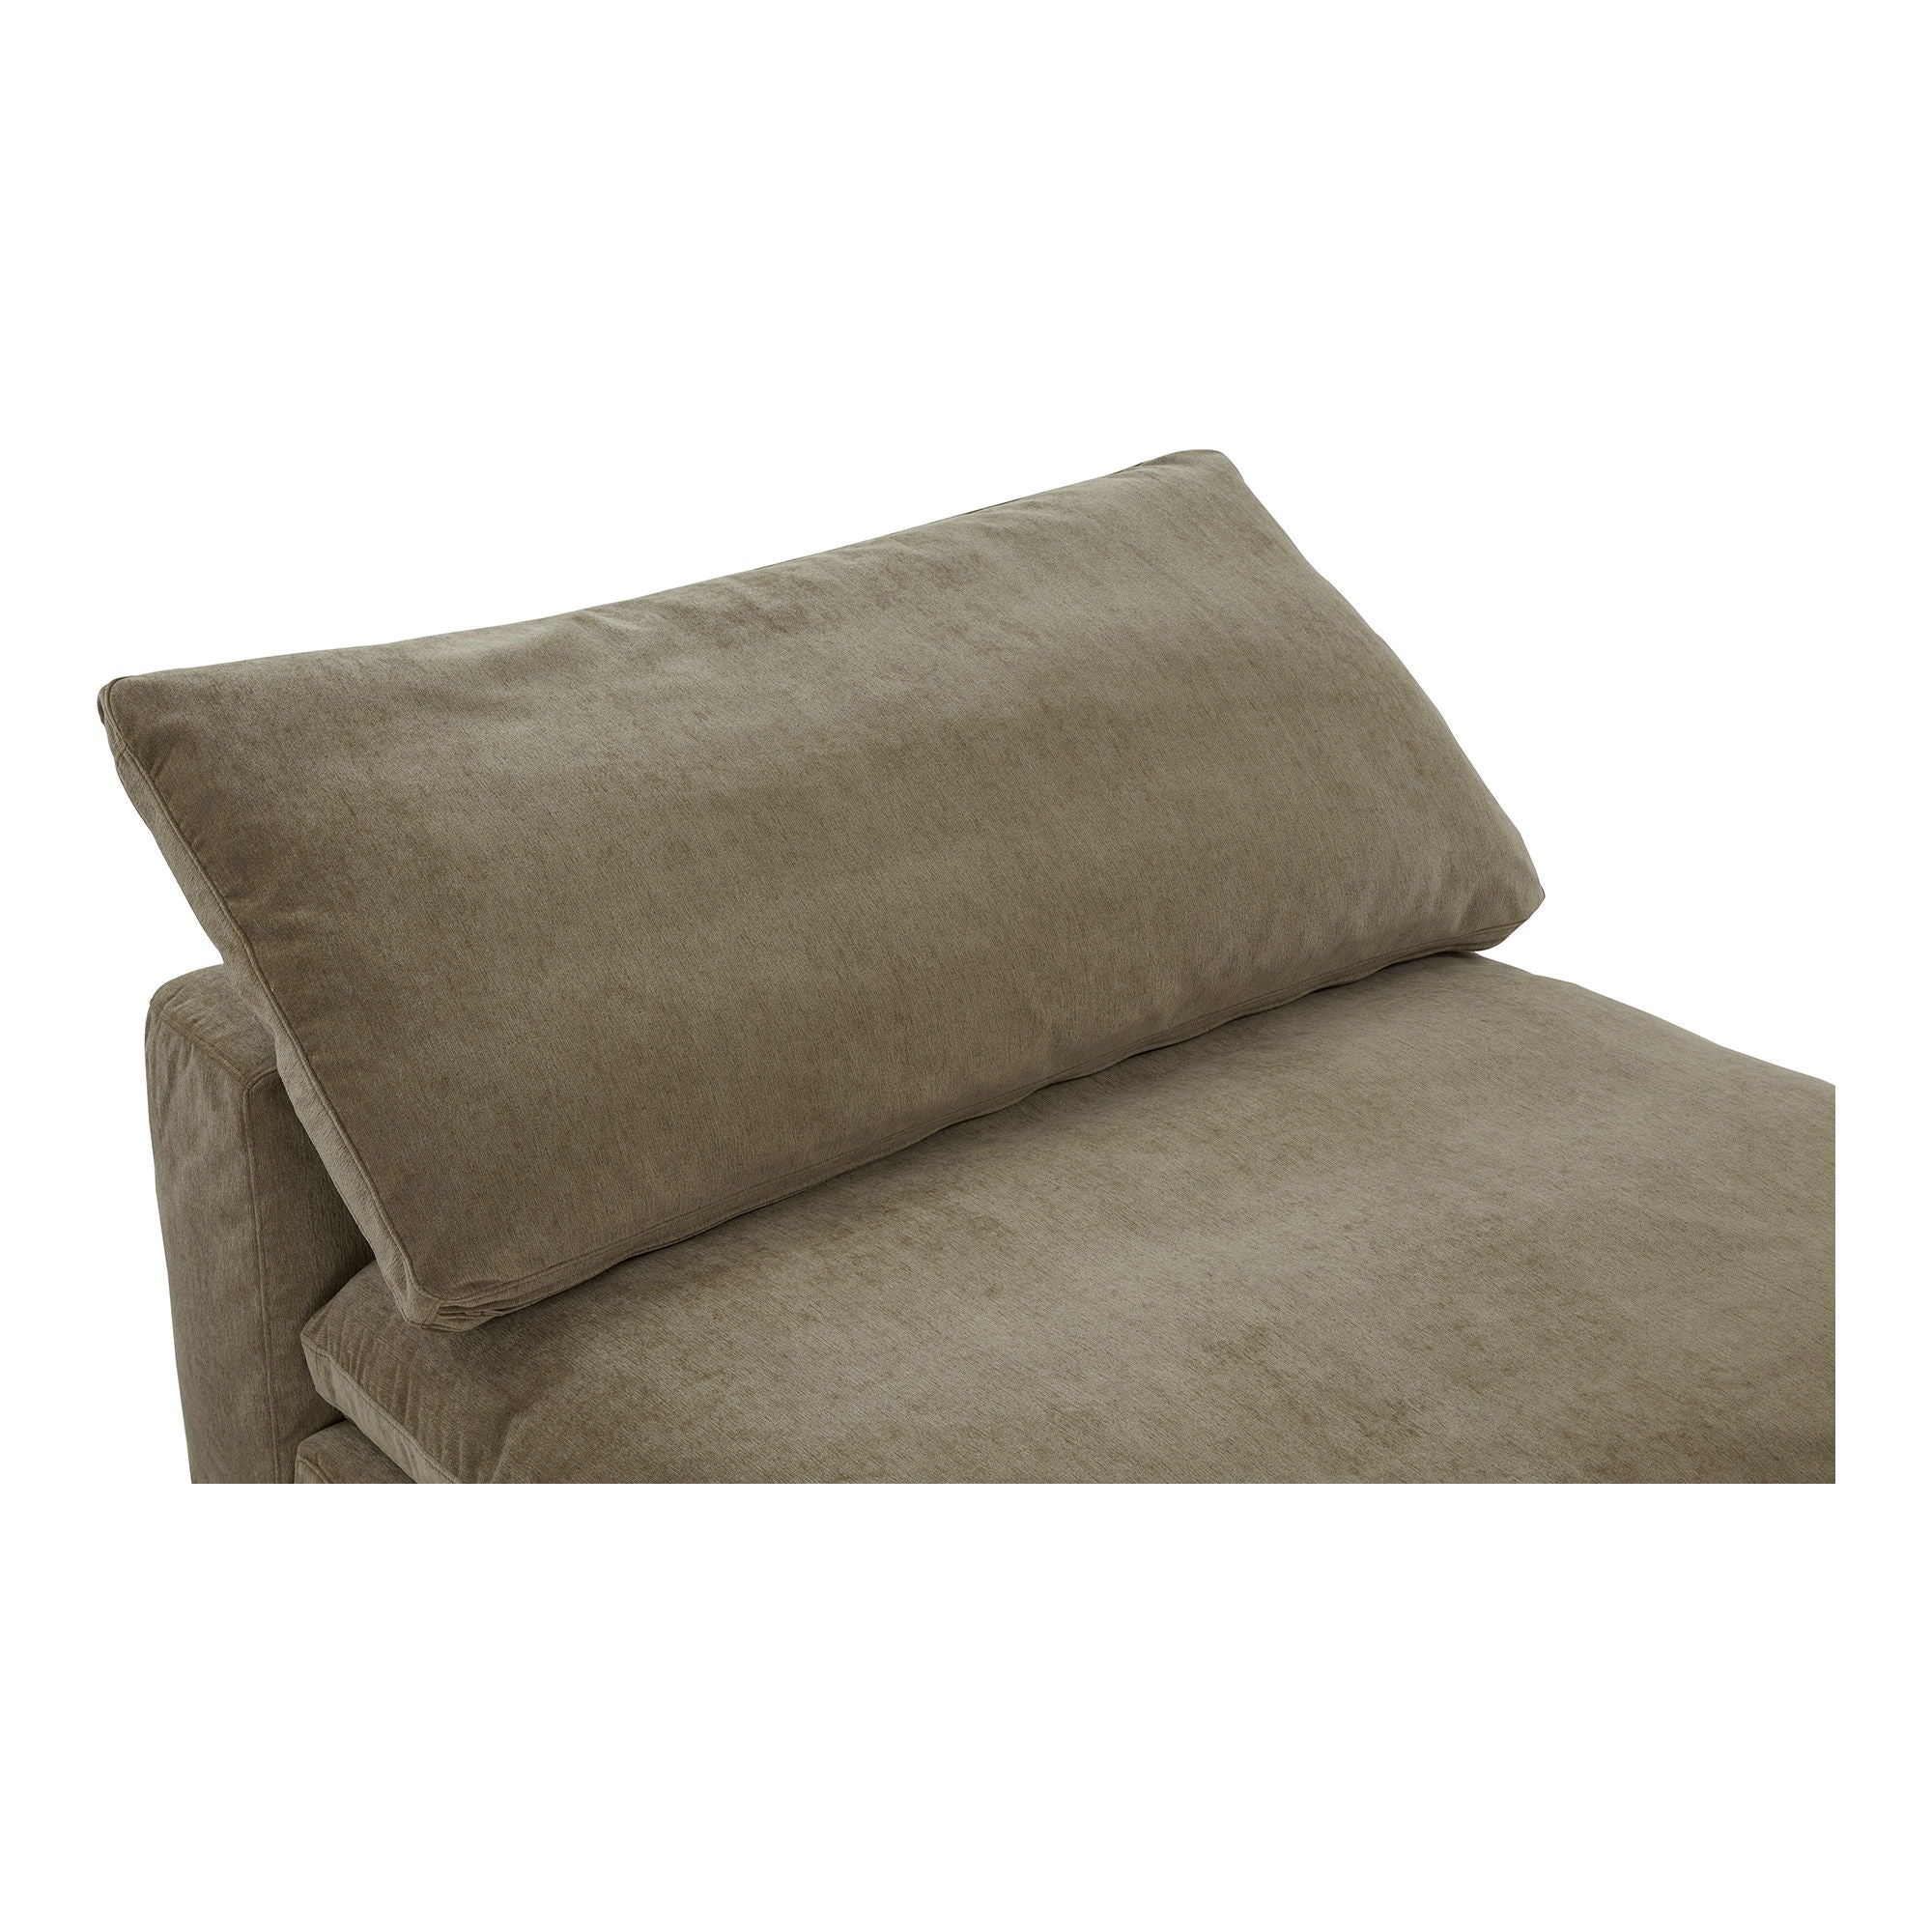 Clay - Slipper Chair Performance Fabric - Light Brown